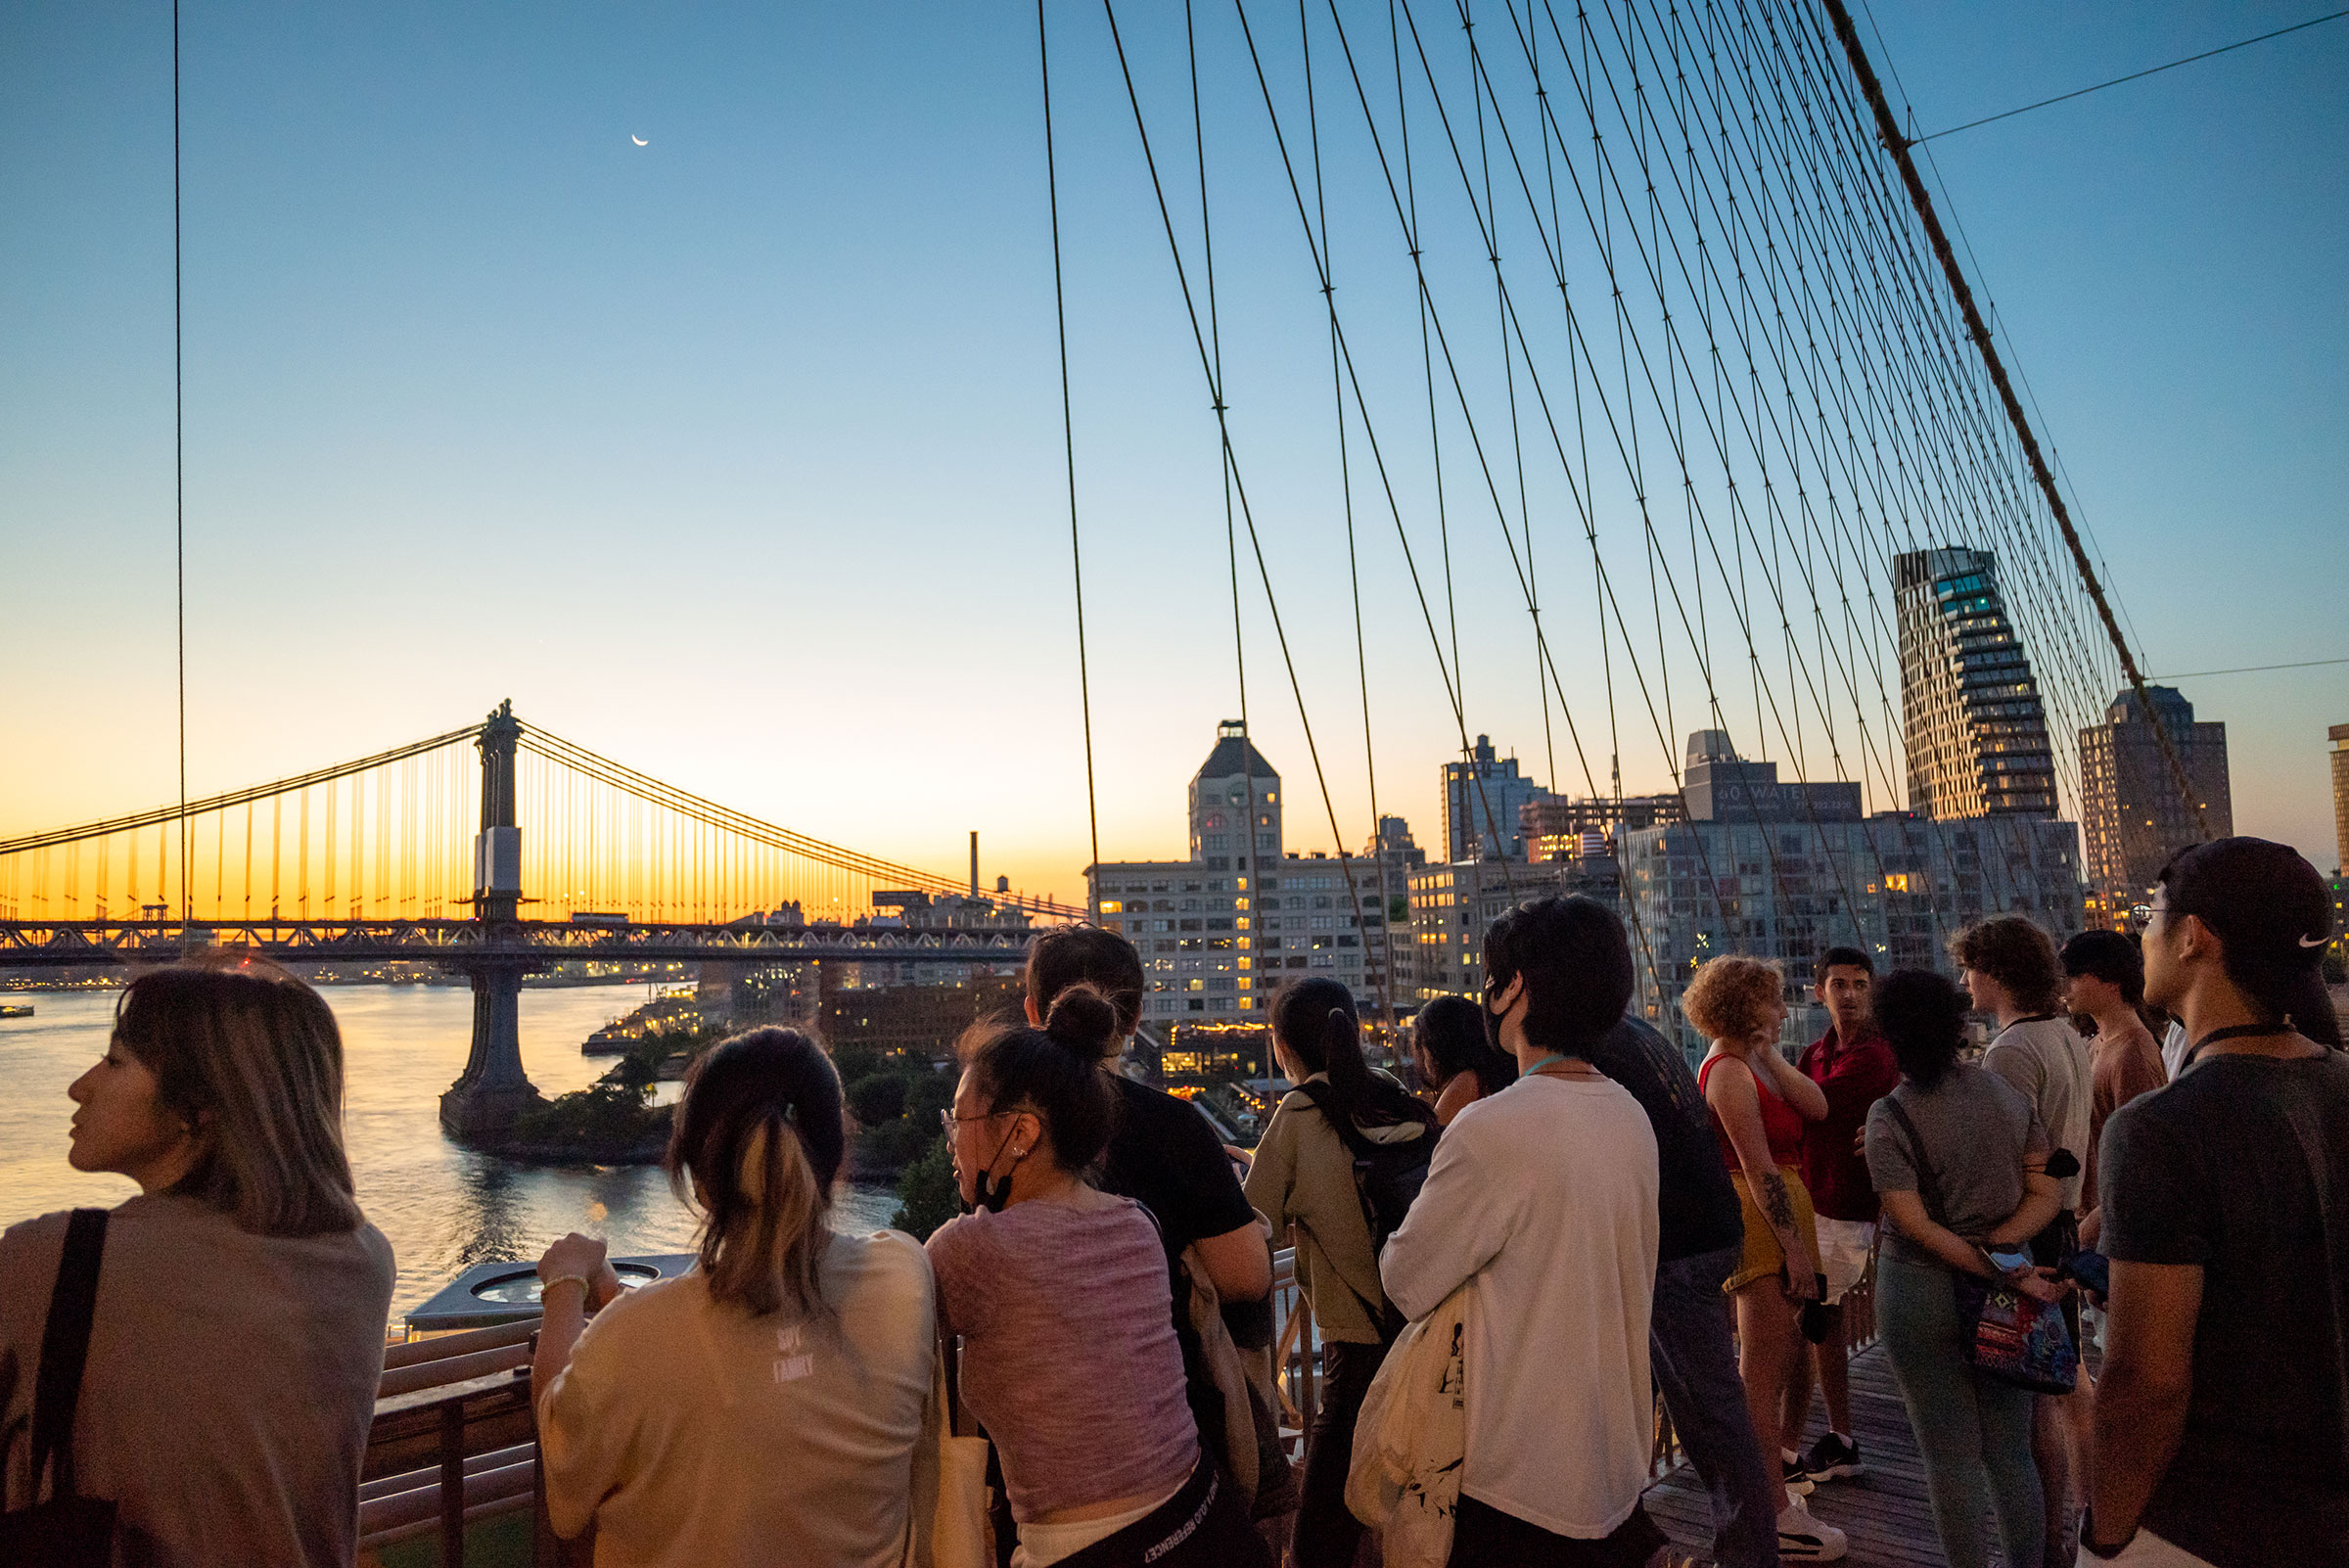 Students watch the sunrise over Brooklyn from the Brooklyn Bridge.